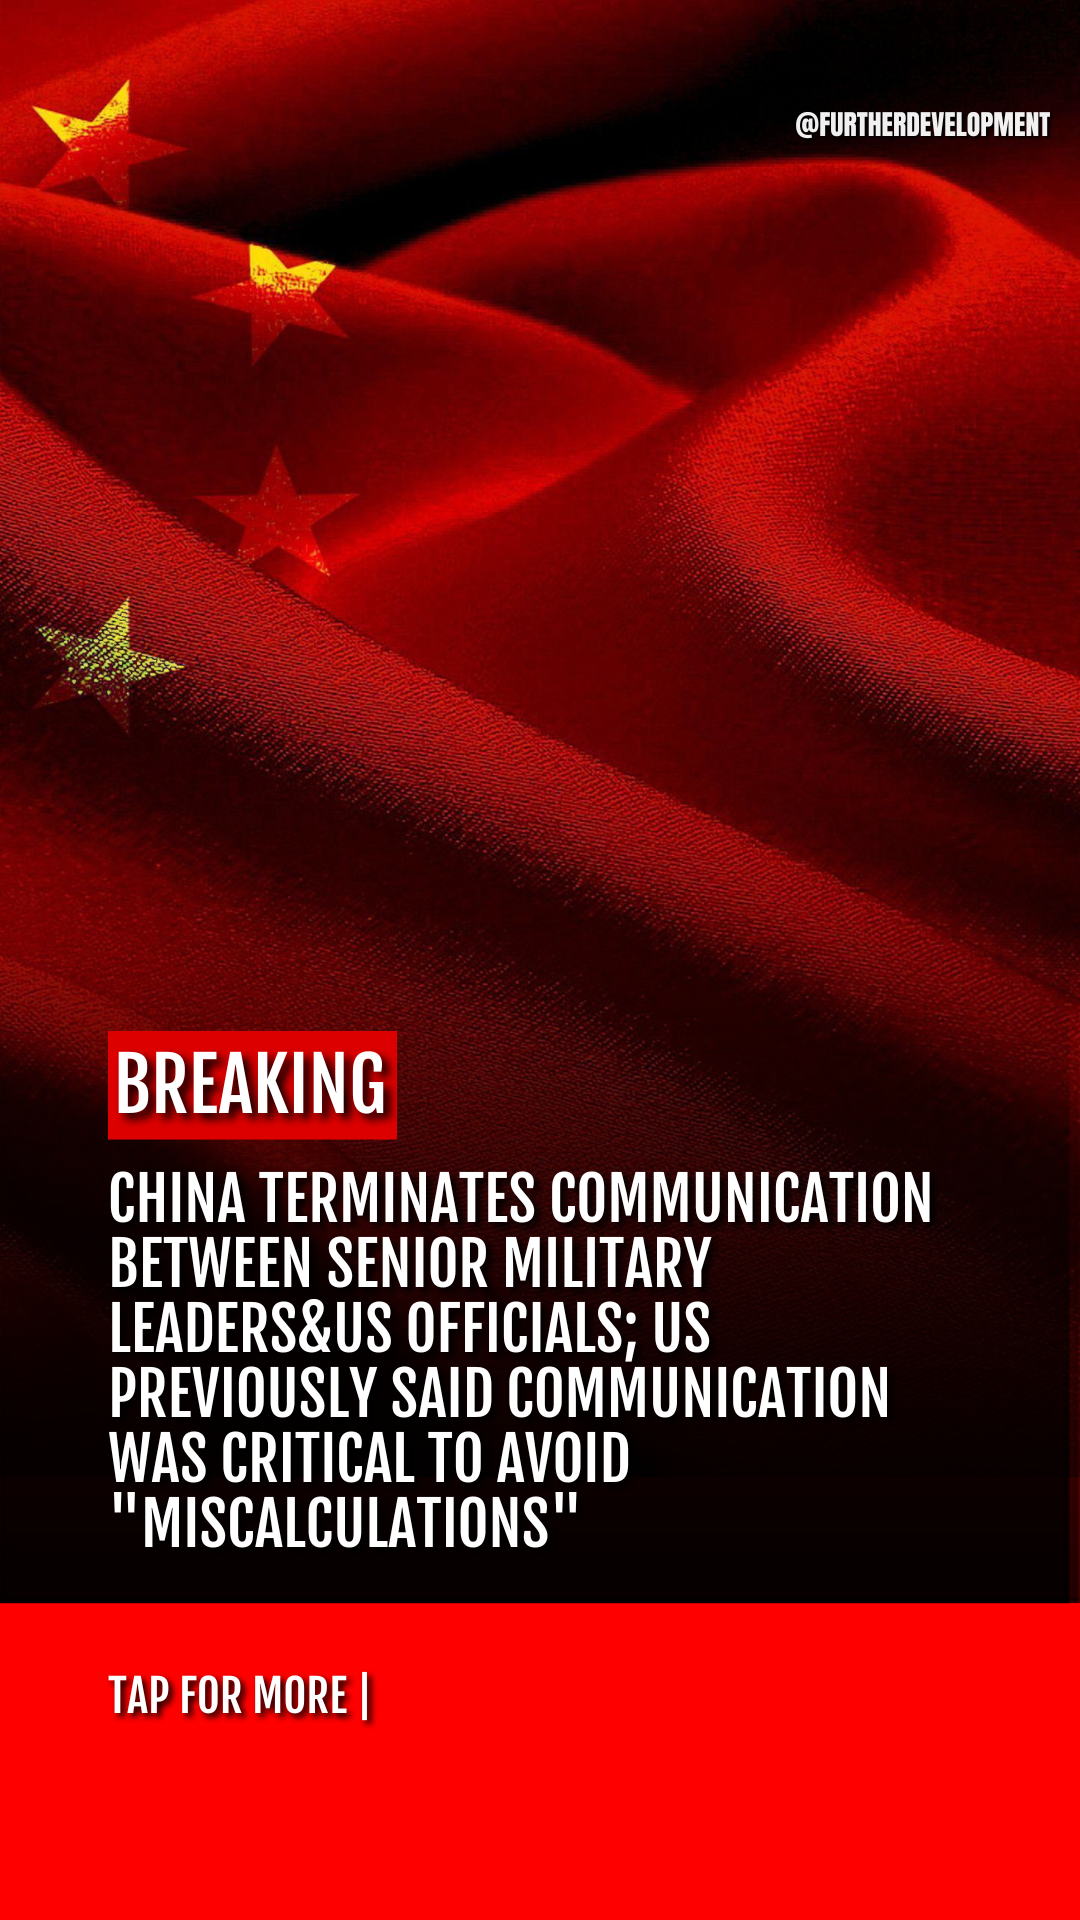 China terminates communication between senior military leaders&US officials; US previously said communication was critical to avoid "miscalculations"